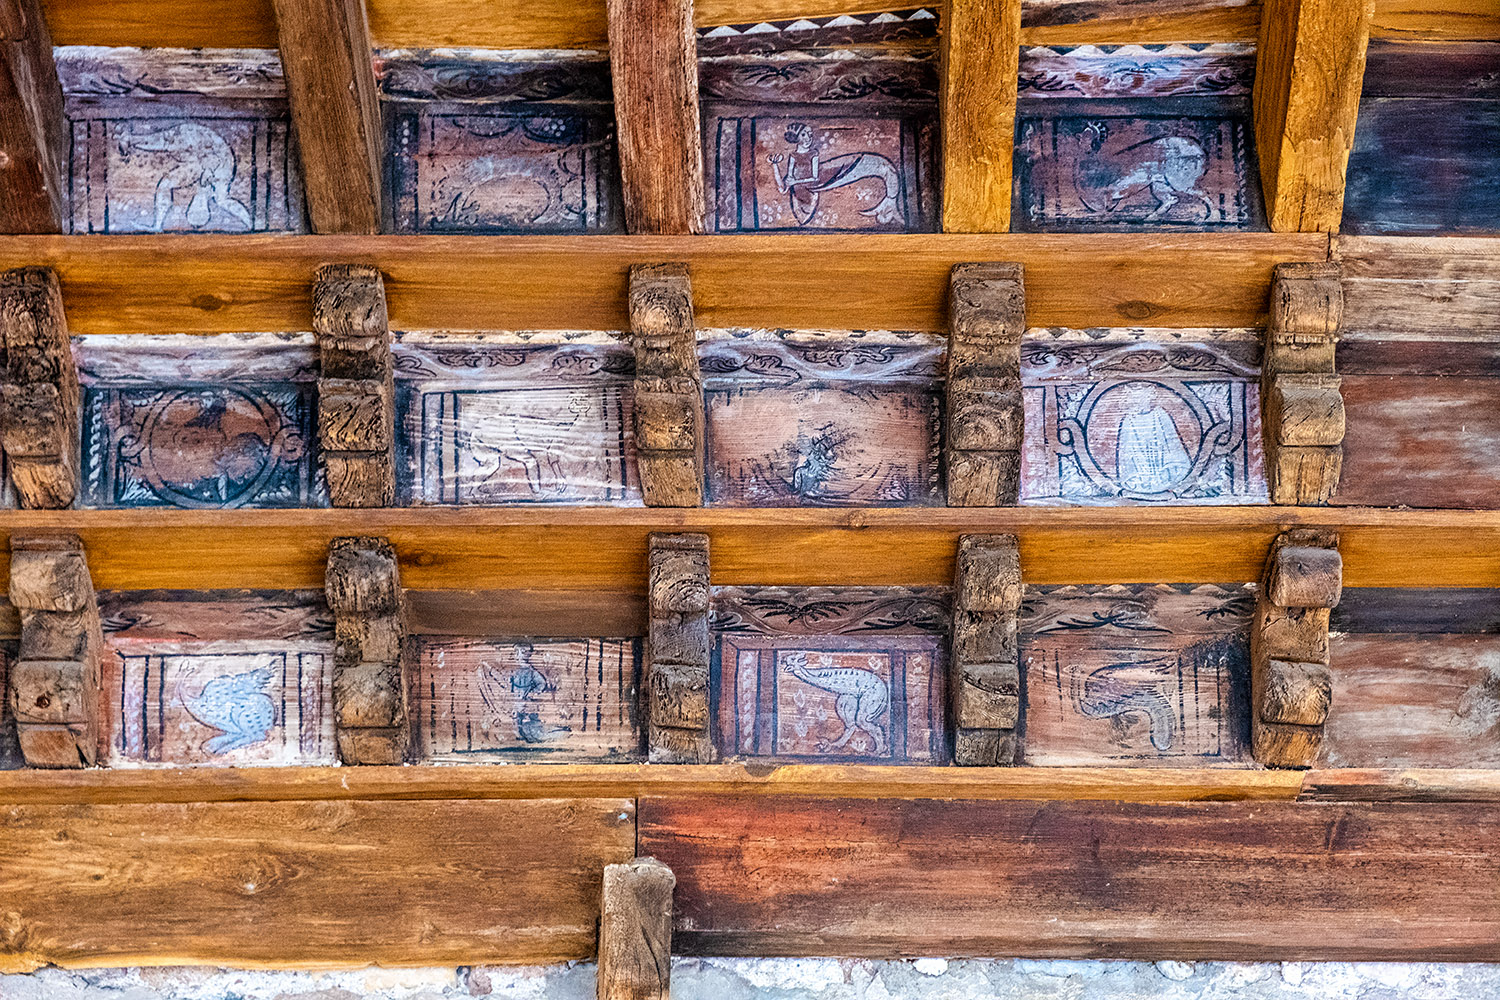 The wooden ceiling of the cloister: a kind of medieval Facebook